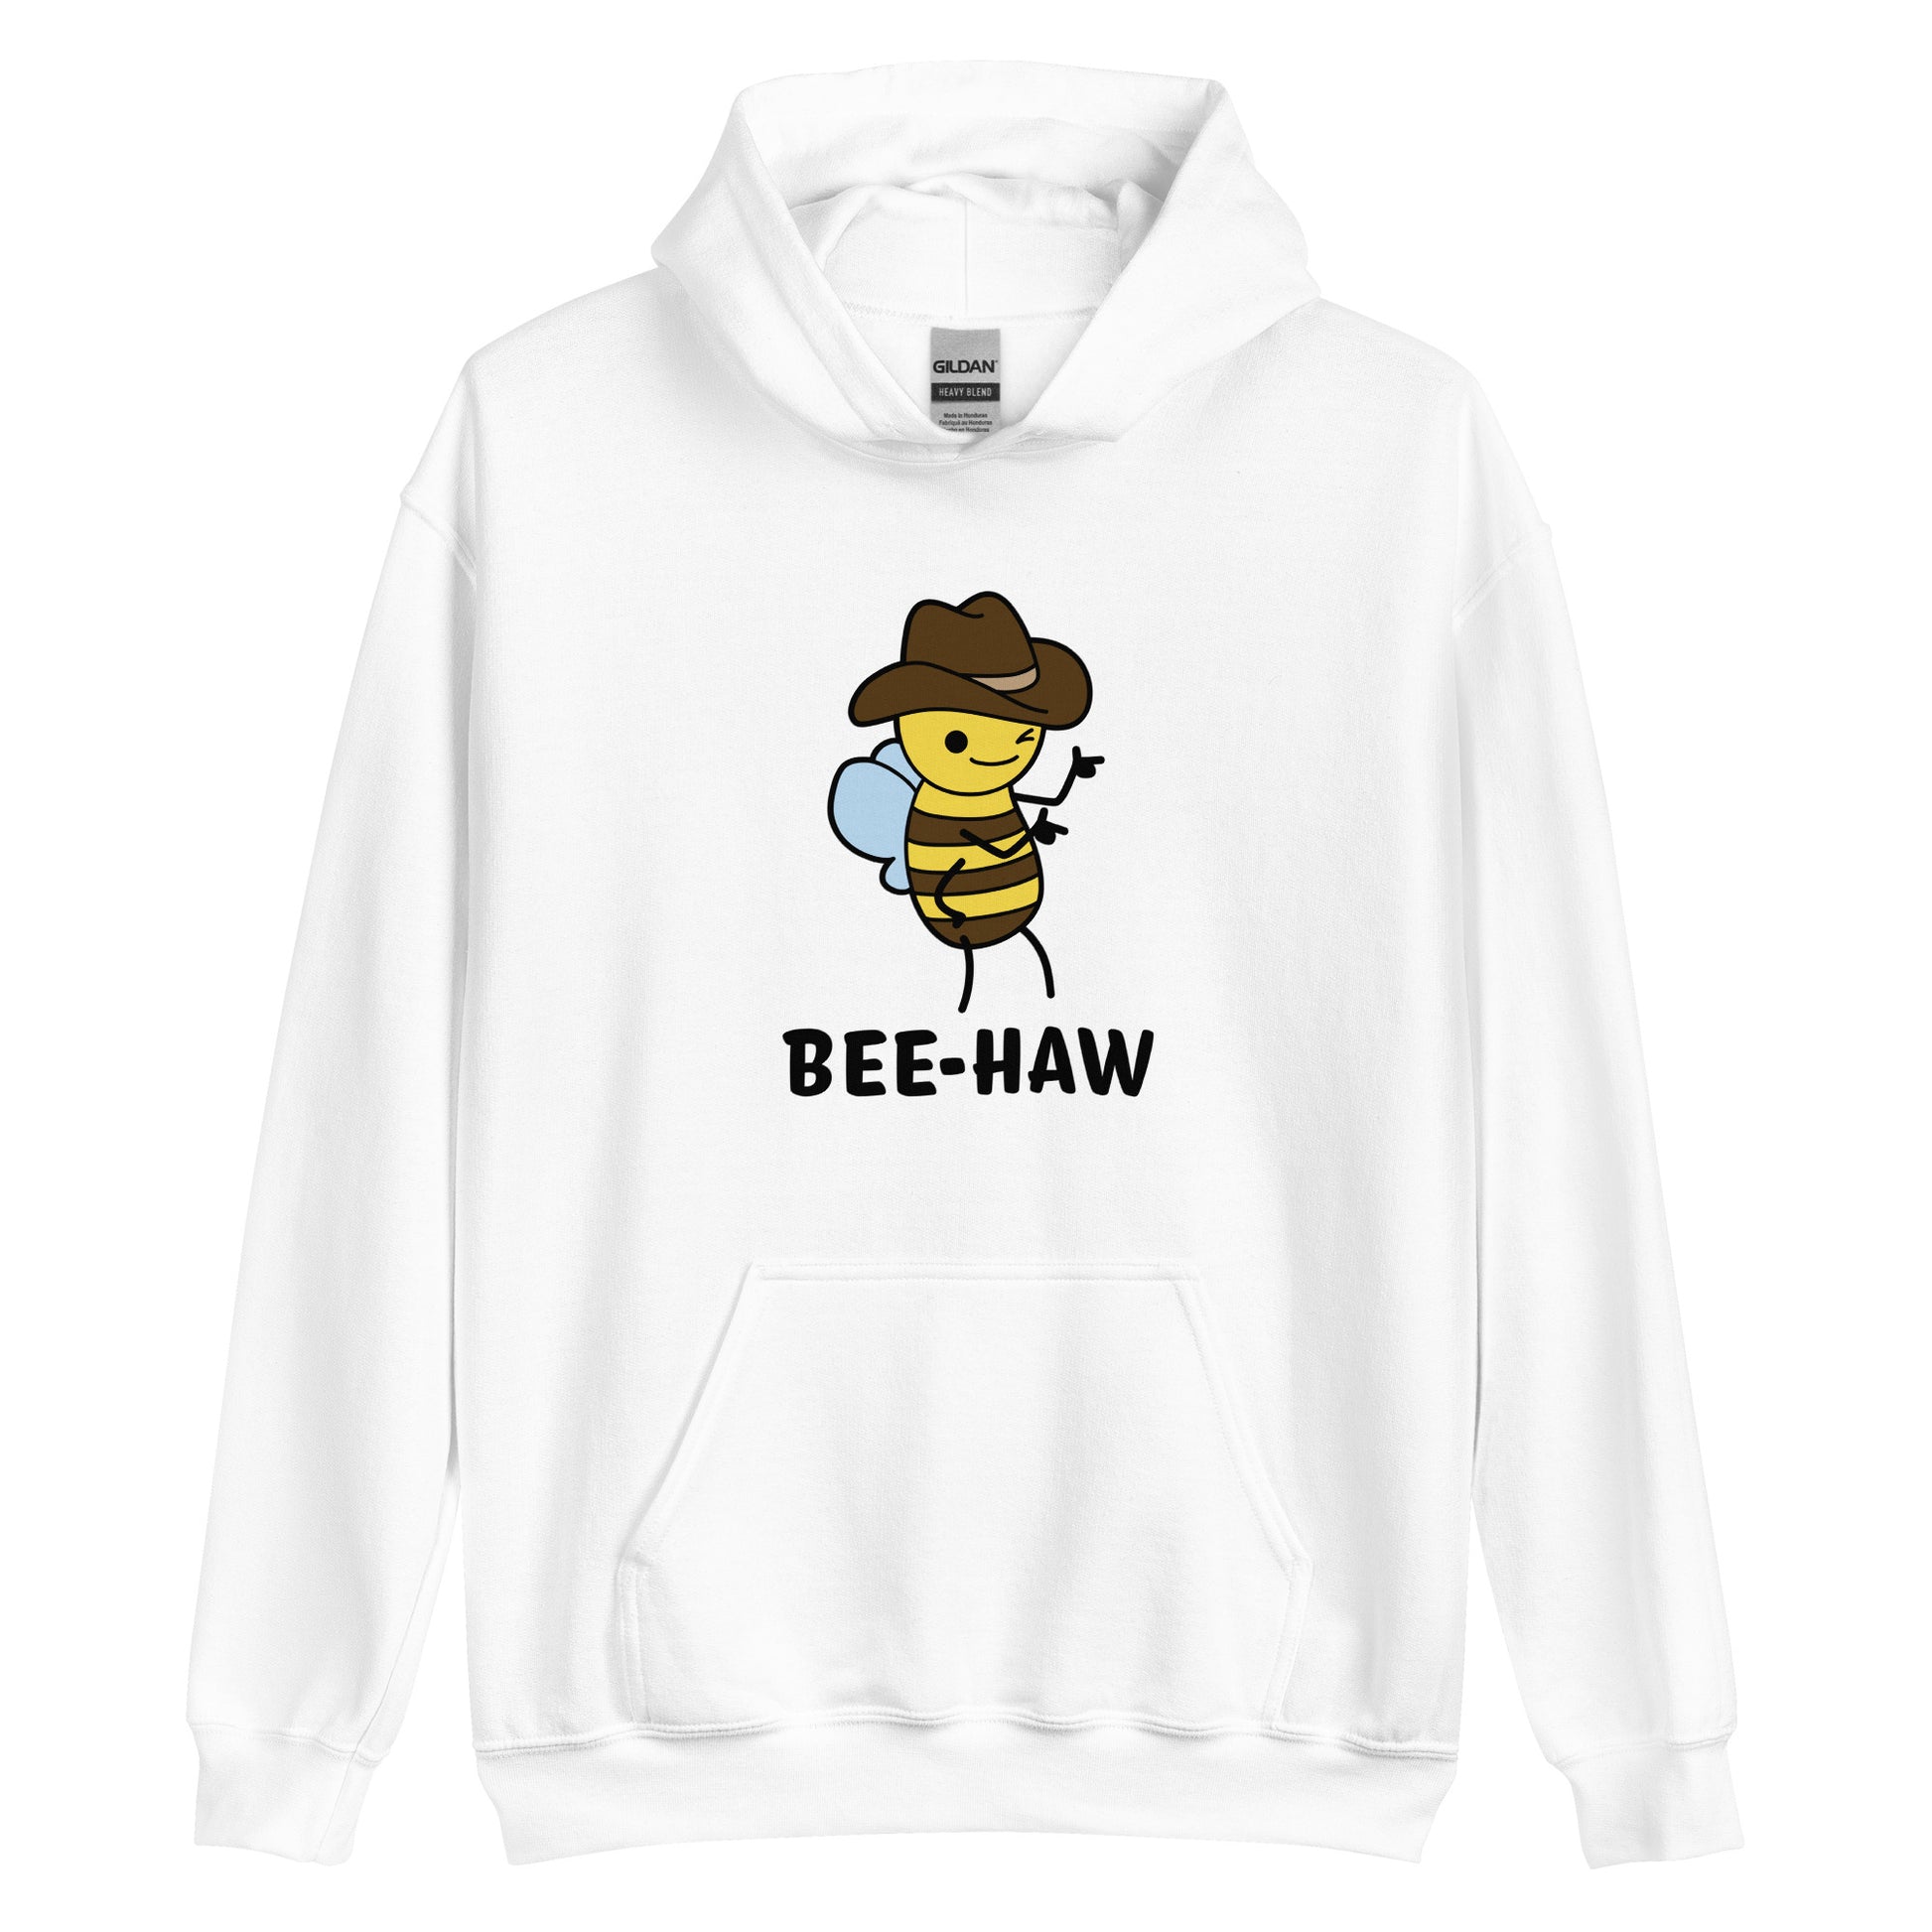 A white hooded sweatshirt featuring a picture of a bee wearing a cowboy hat. The bee is winking and pointing finger guns. Text underneath the bee reads "Bee-Haw"